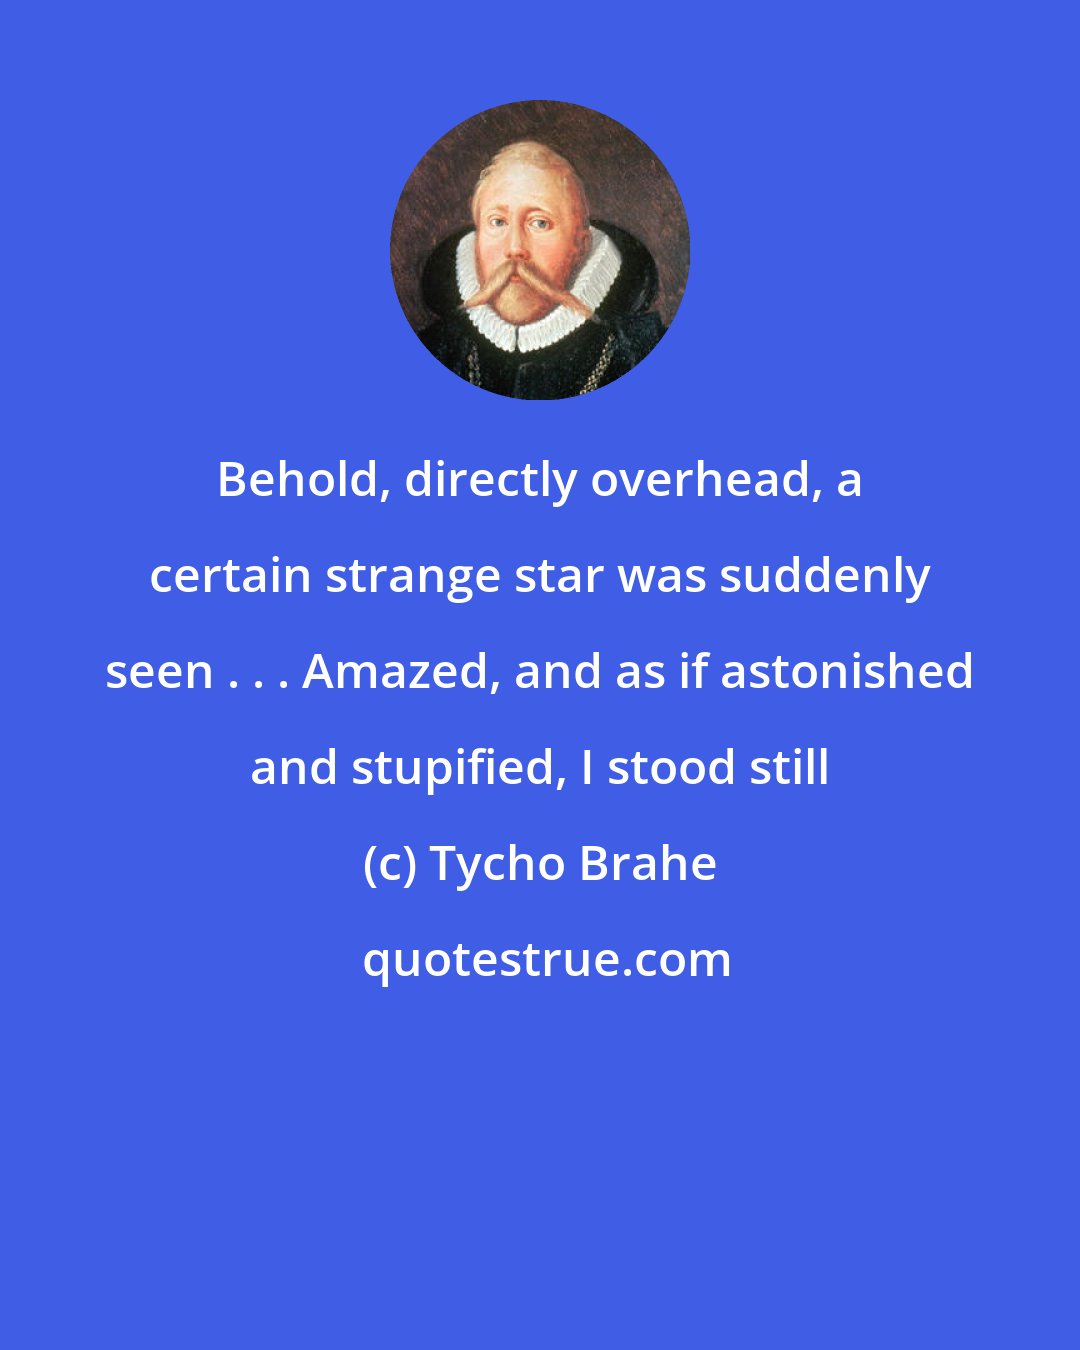 Tycho Brahe: Behold, directly overhead, a certain strange star was suddenly seen . . . Amazed, and as if astonished and stupified, I stood still